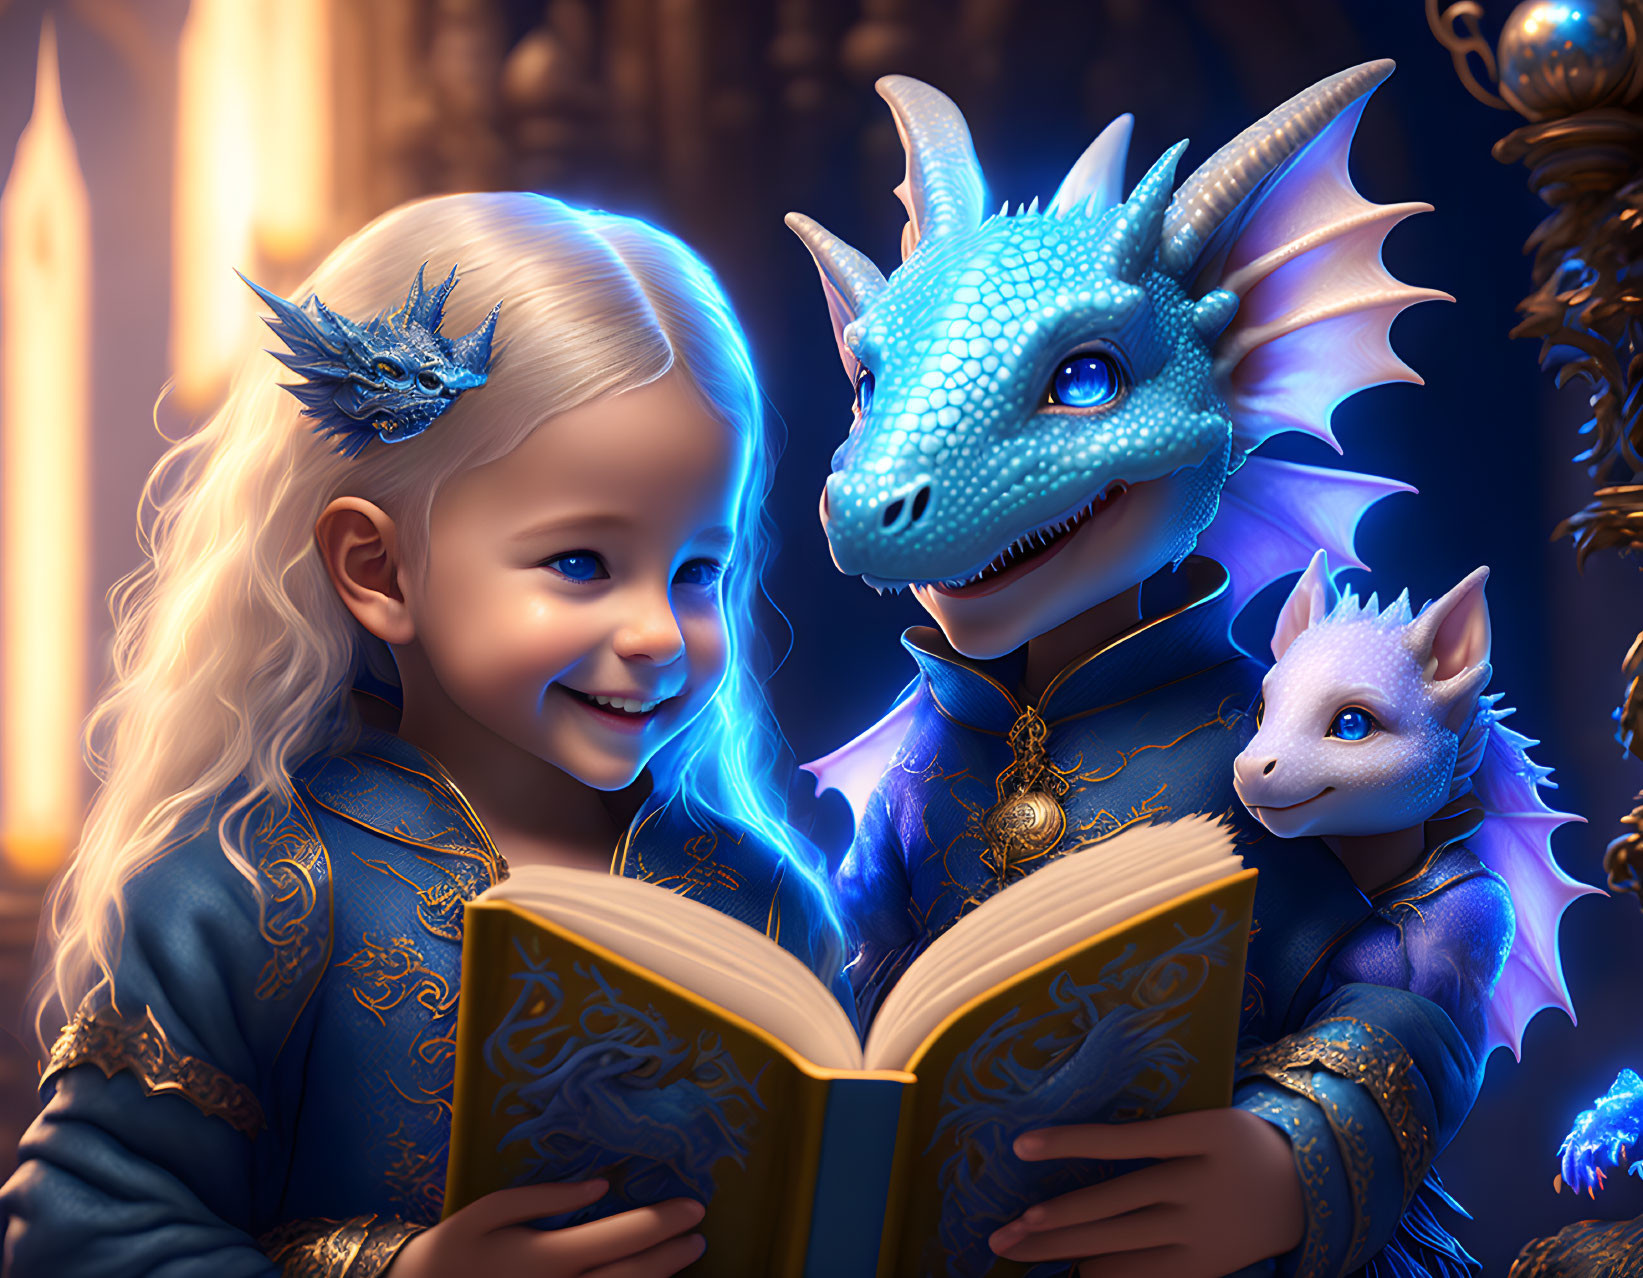 Young girl with her pet dragons